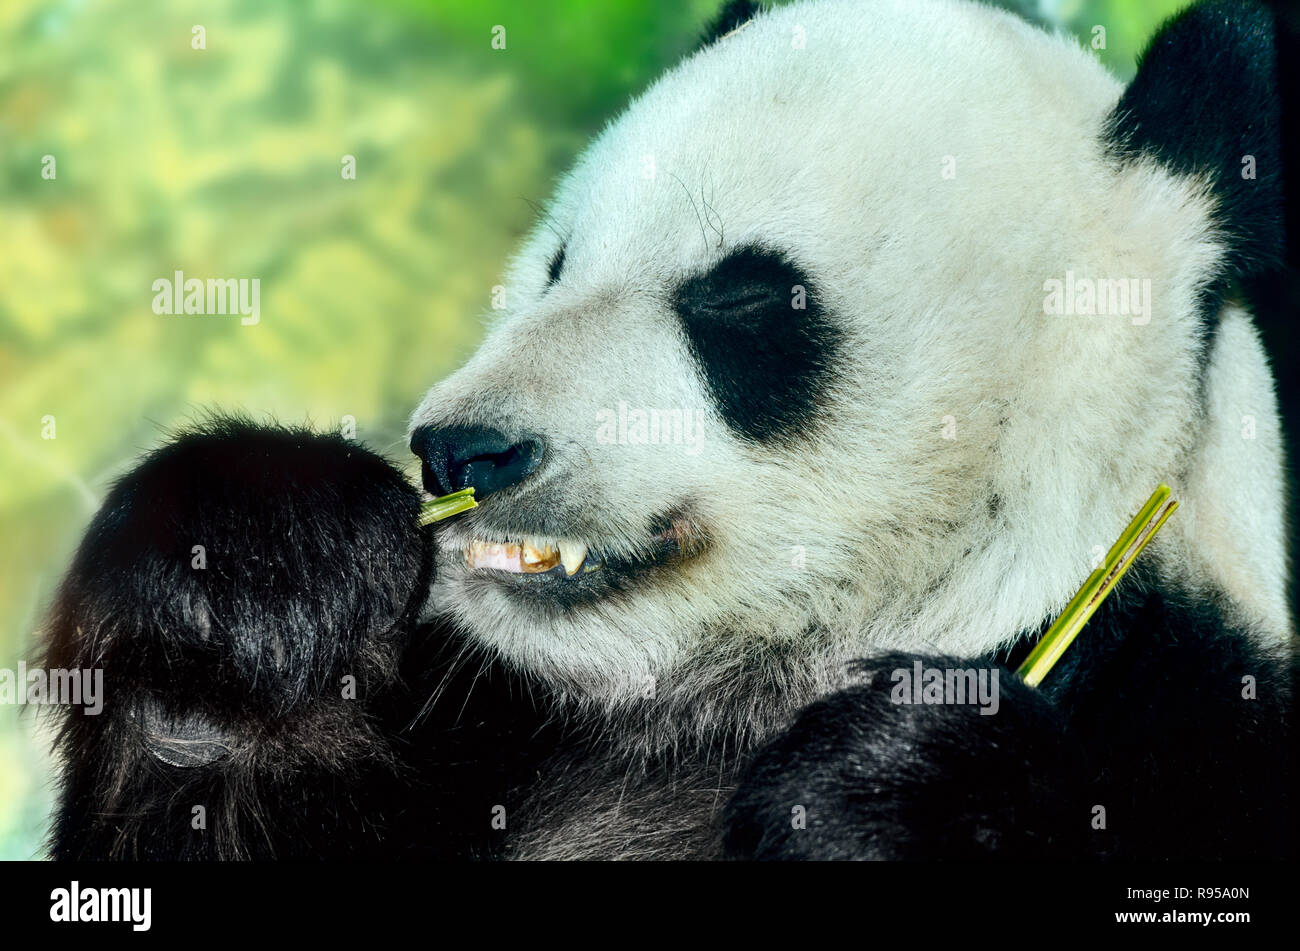 A giant panda bear (Ailuropoda melanoleuca) munches on bamboo, September 8, 2015, at the Memphis Zoo in Memphis, Tennessee. Stock Photo